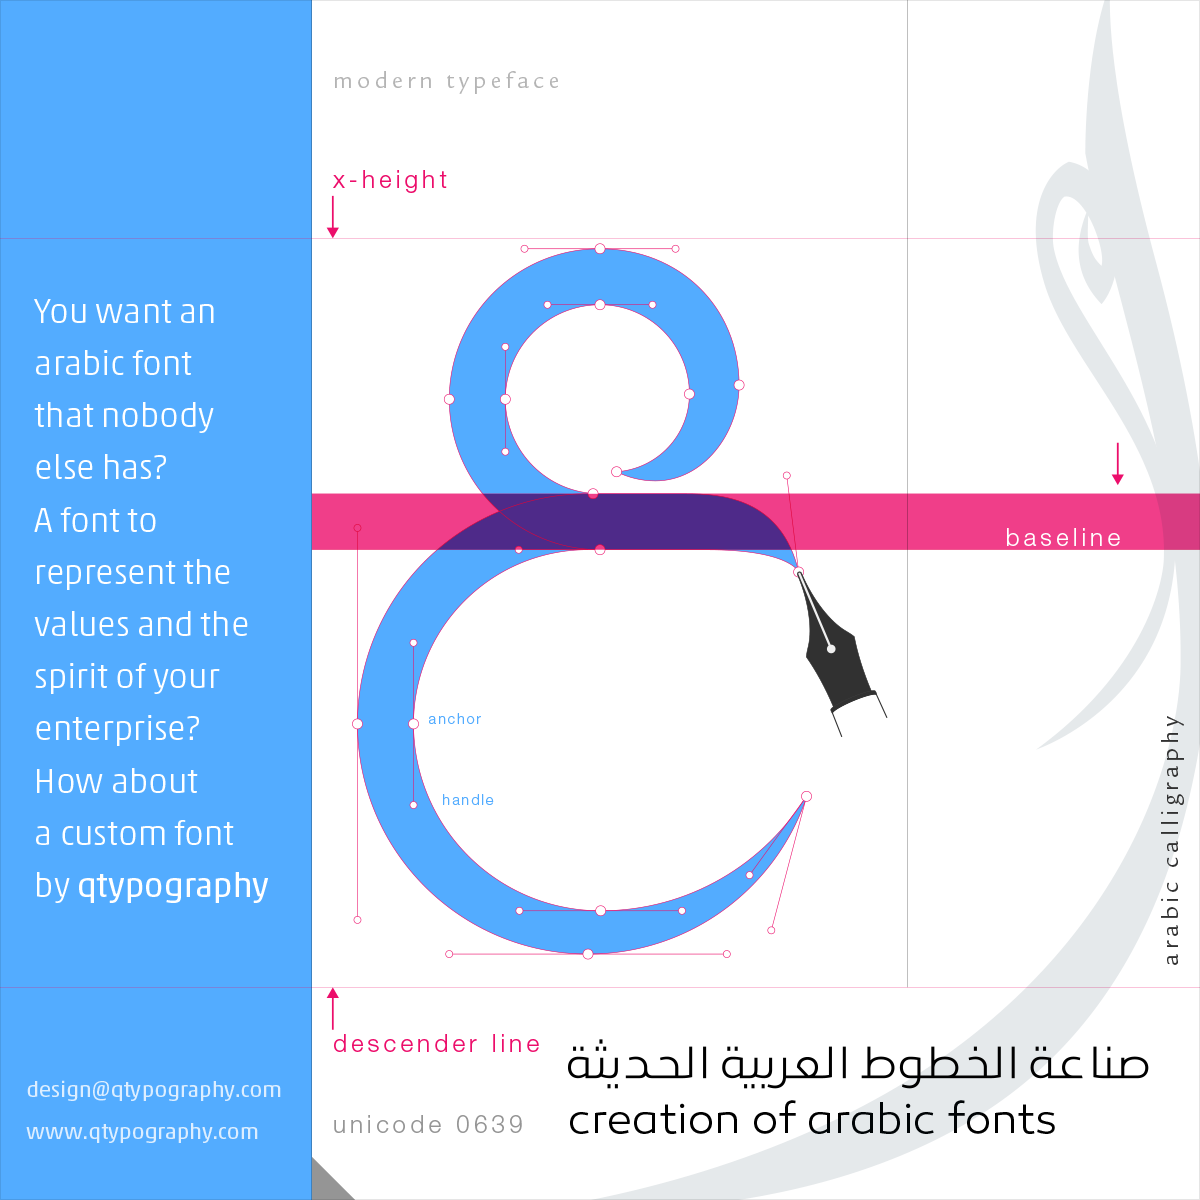 You want an arabic font that nobody else has?